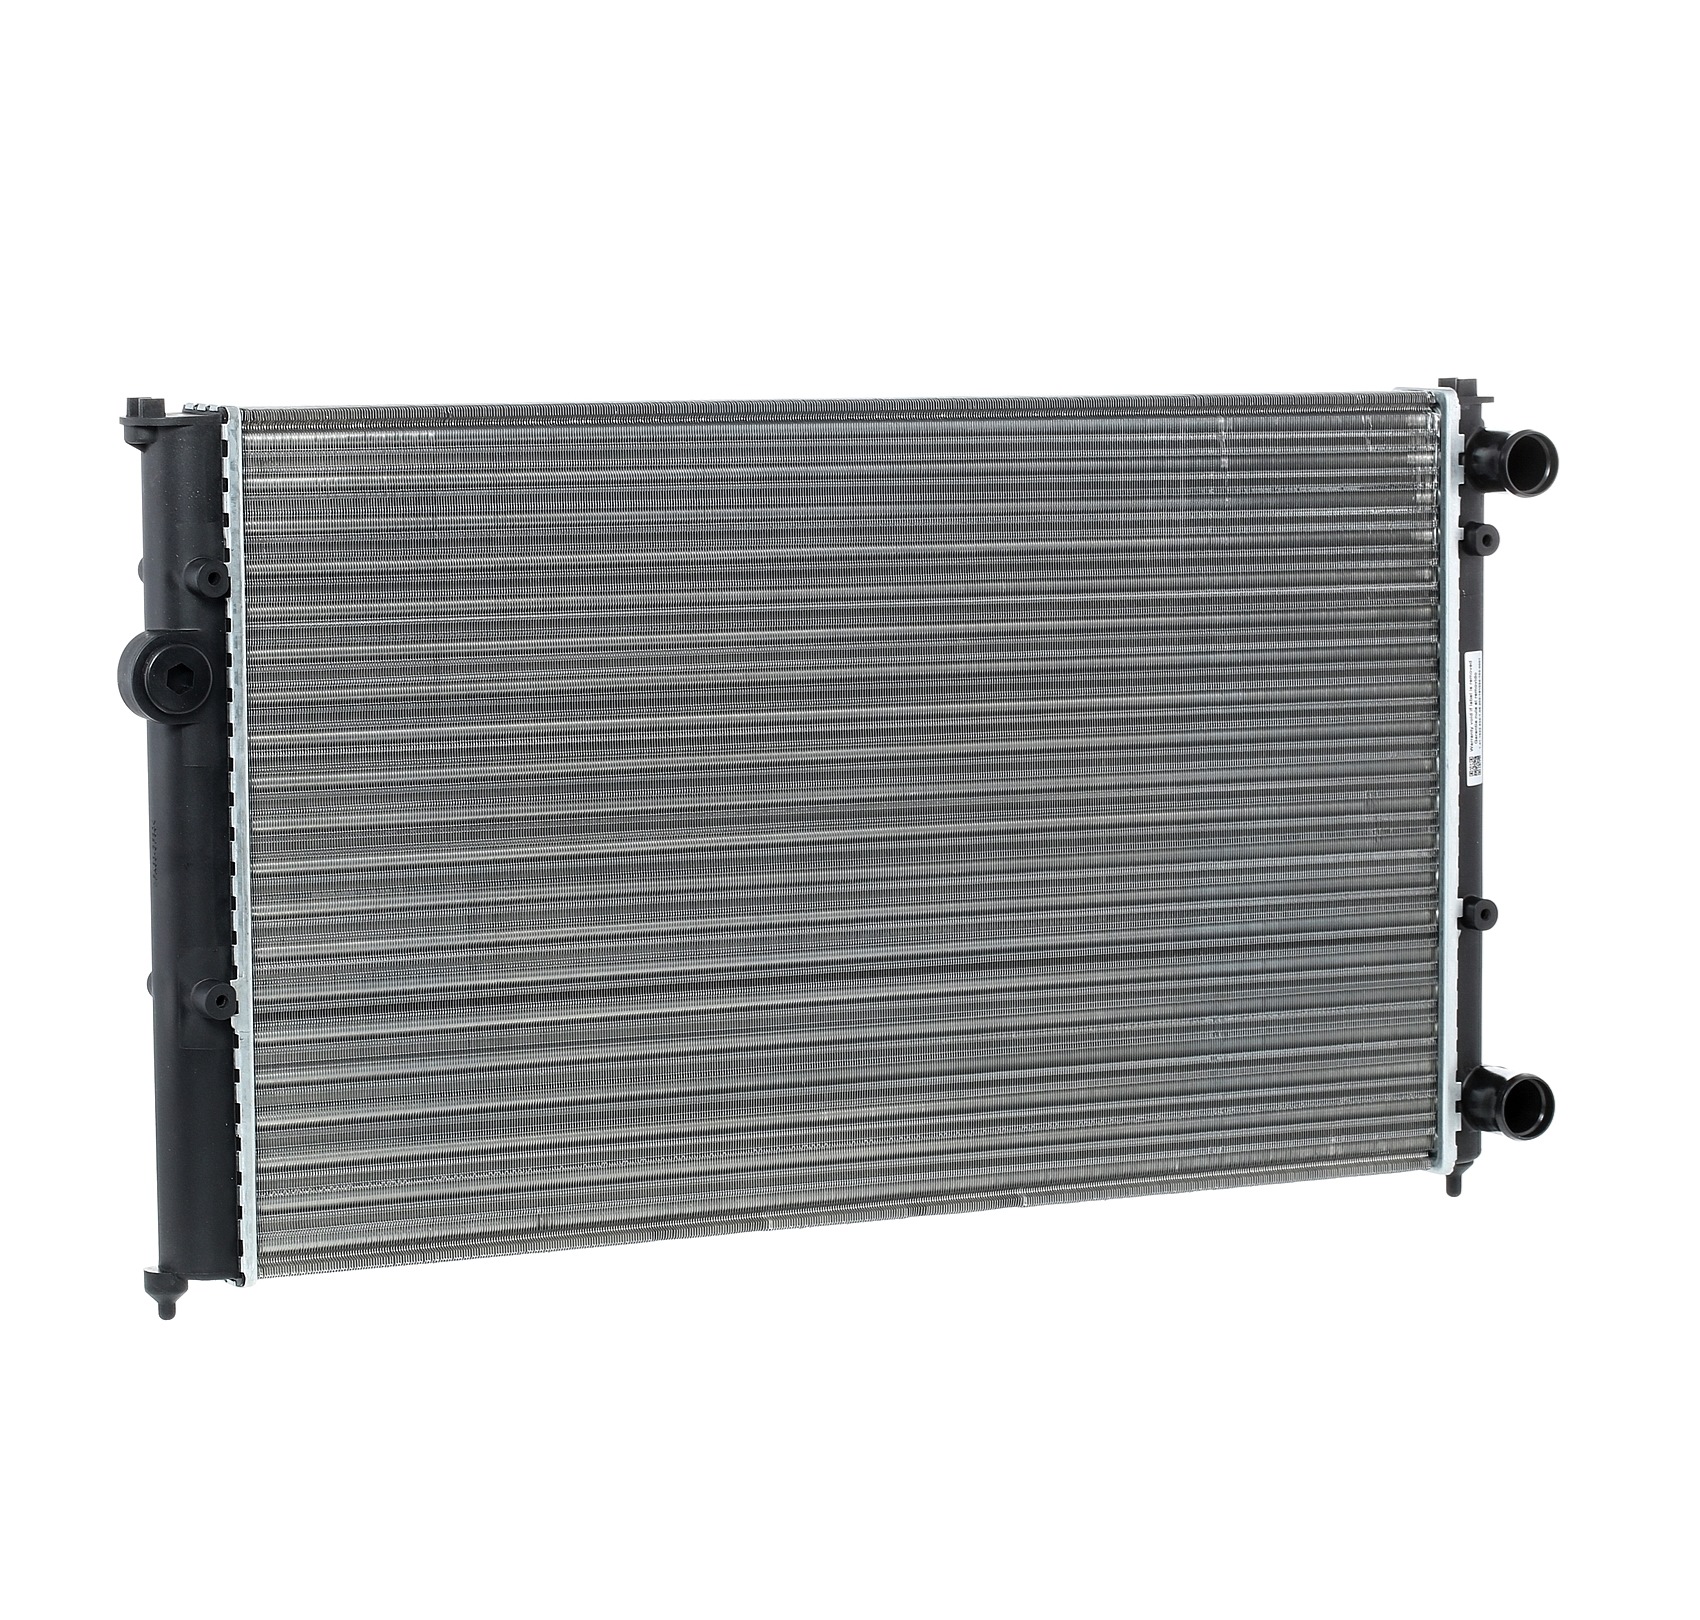 RIDEX 470R0432 Engine radiator Aluminium, for vehicles with air conditioning, 628 x 378 x 34 mm, Manual Transmission, Brazed cooling fins